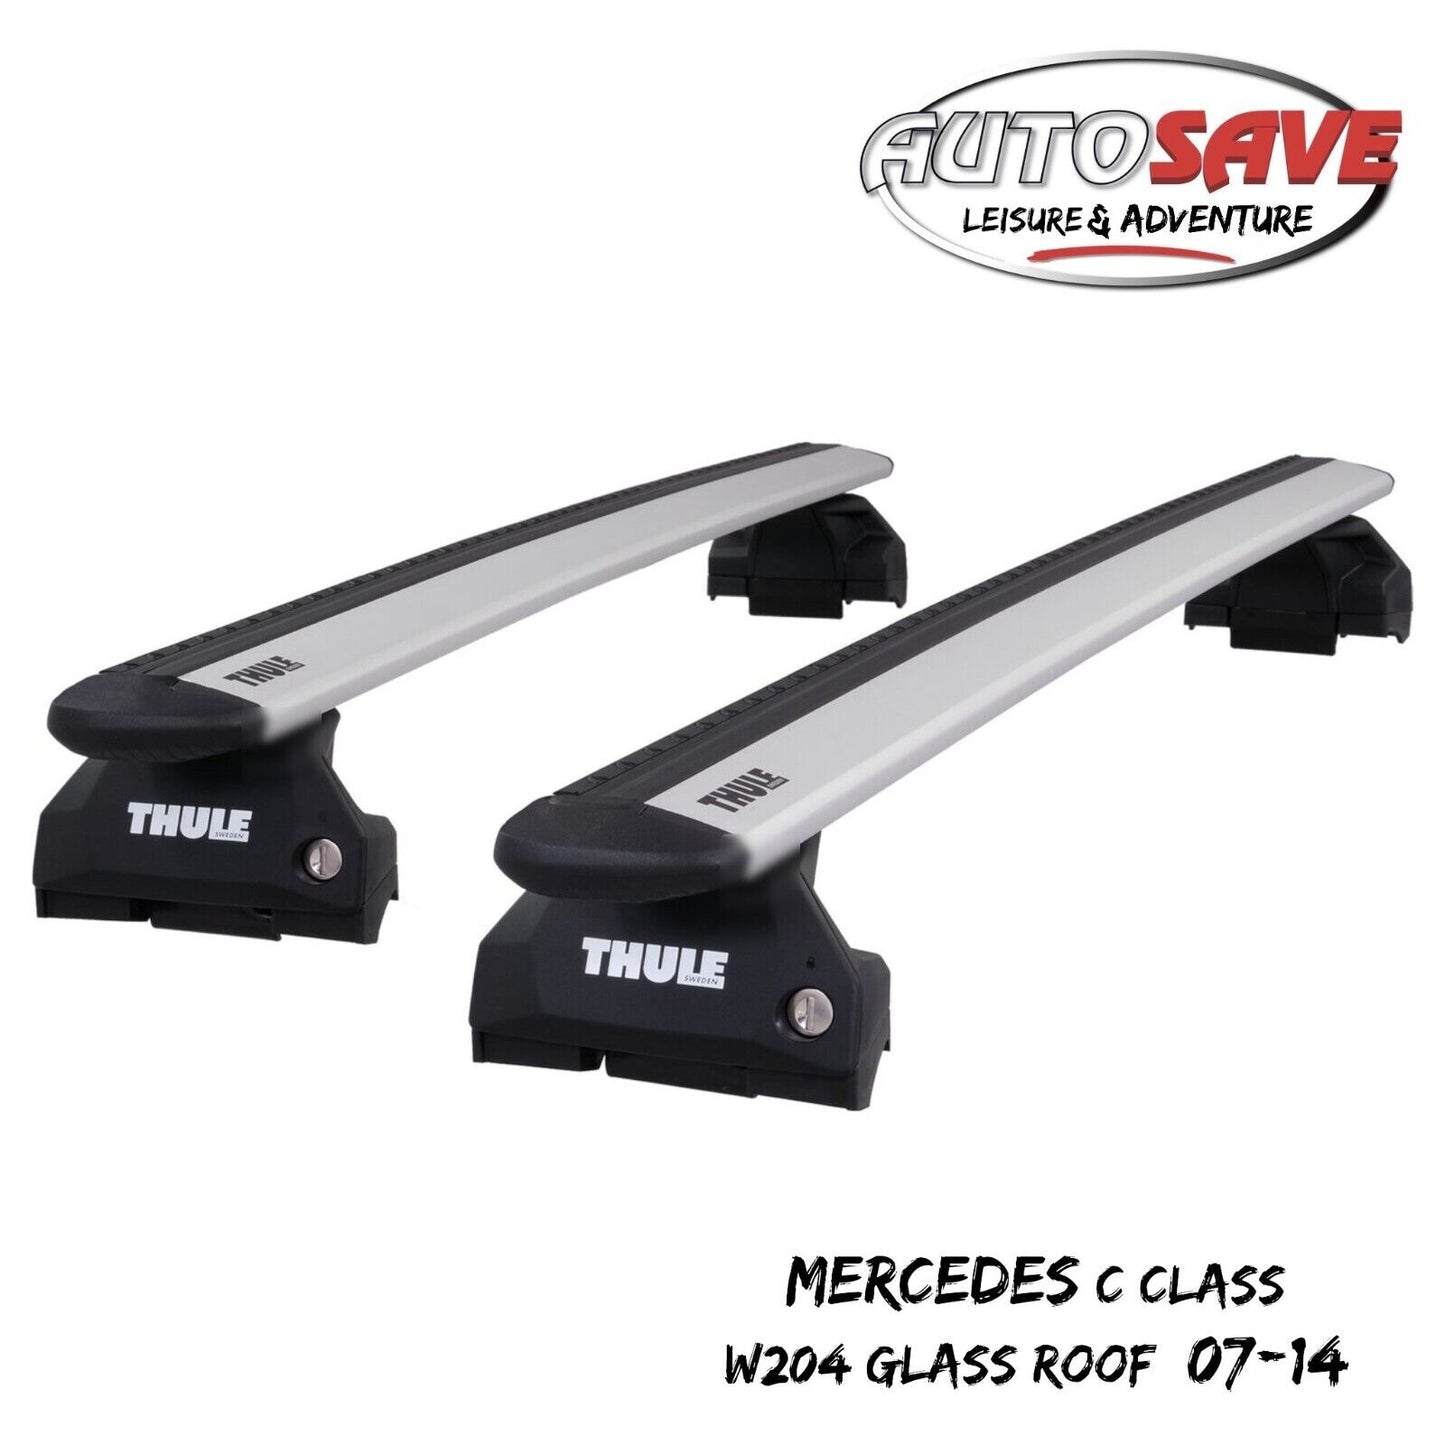 Thule WingBar Evo Silver Roof Bars fit Mercedes C Class W204 (Glass Roof) 07-14